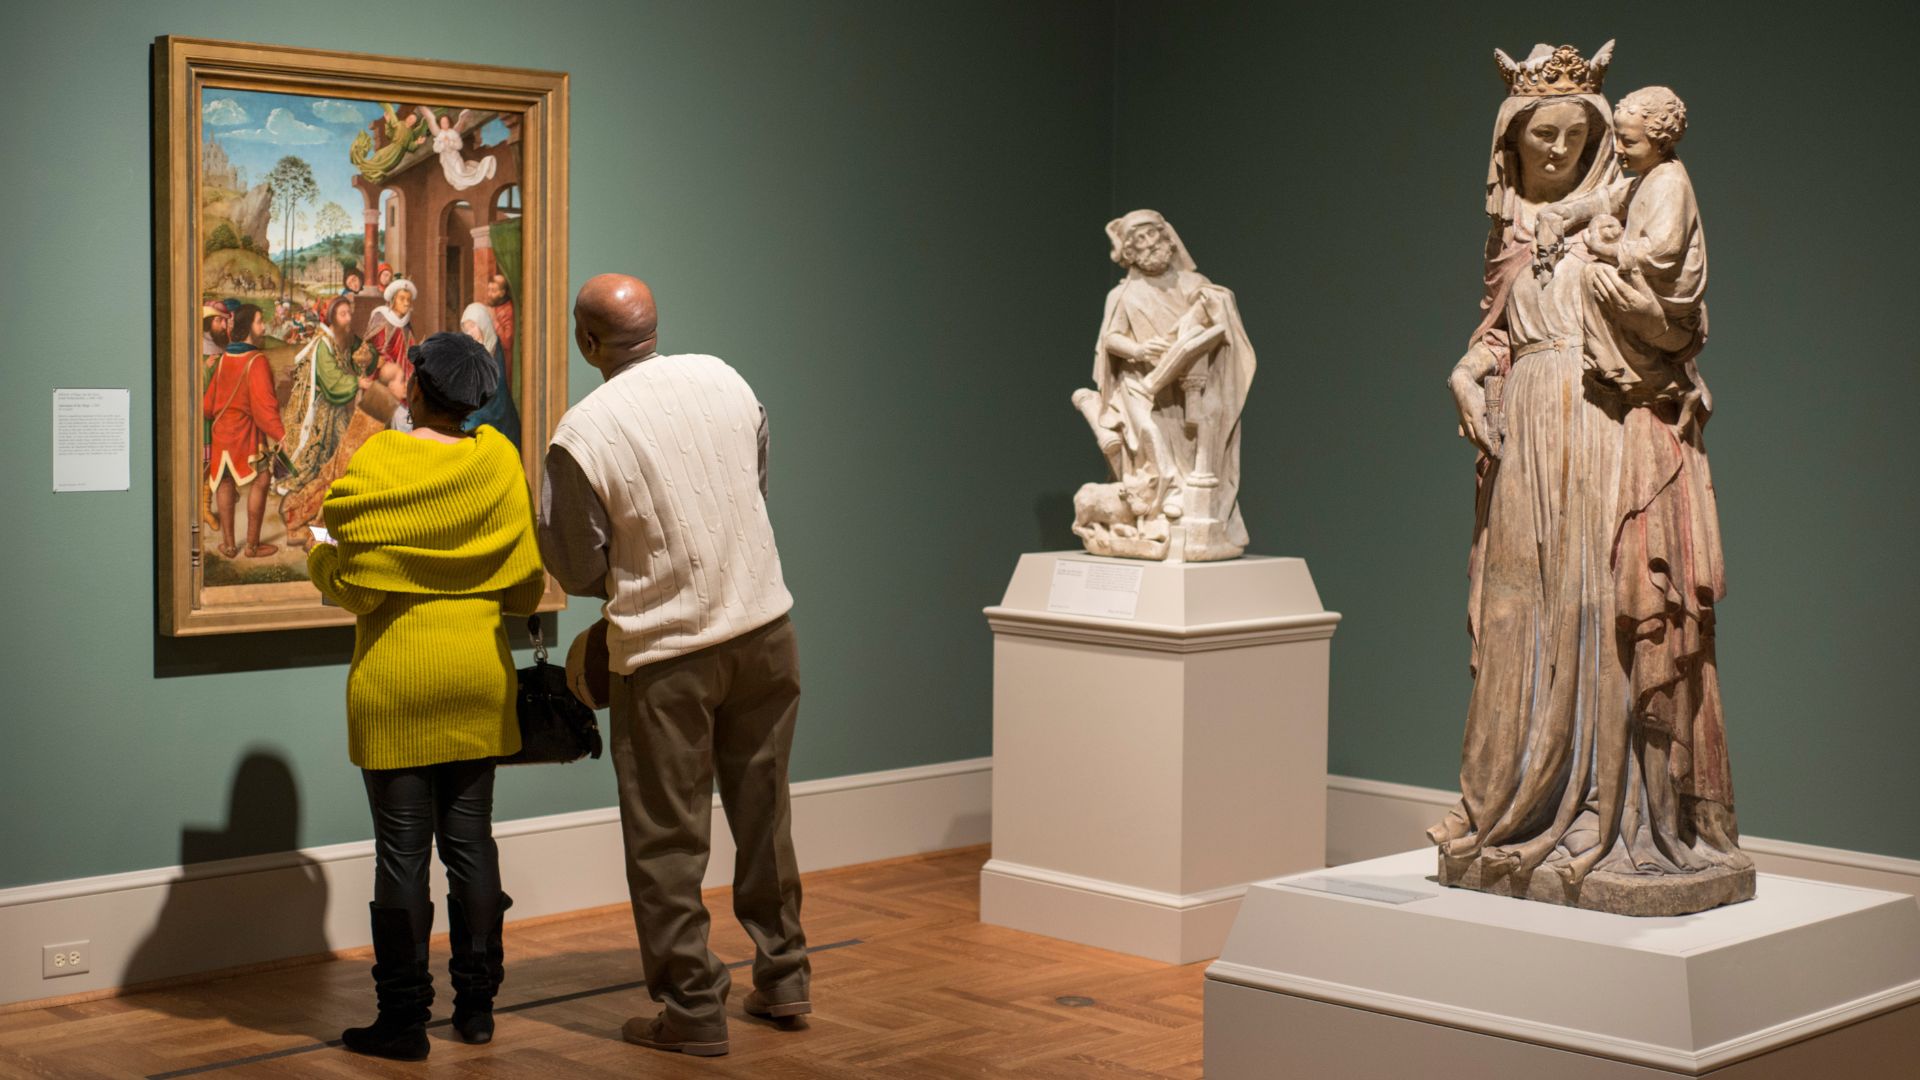 A couple experiences arts and culture at the Saint Louis Art Museum.